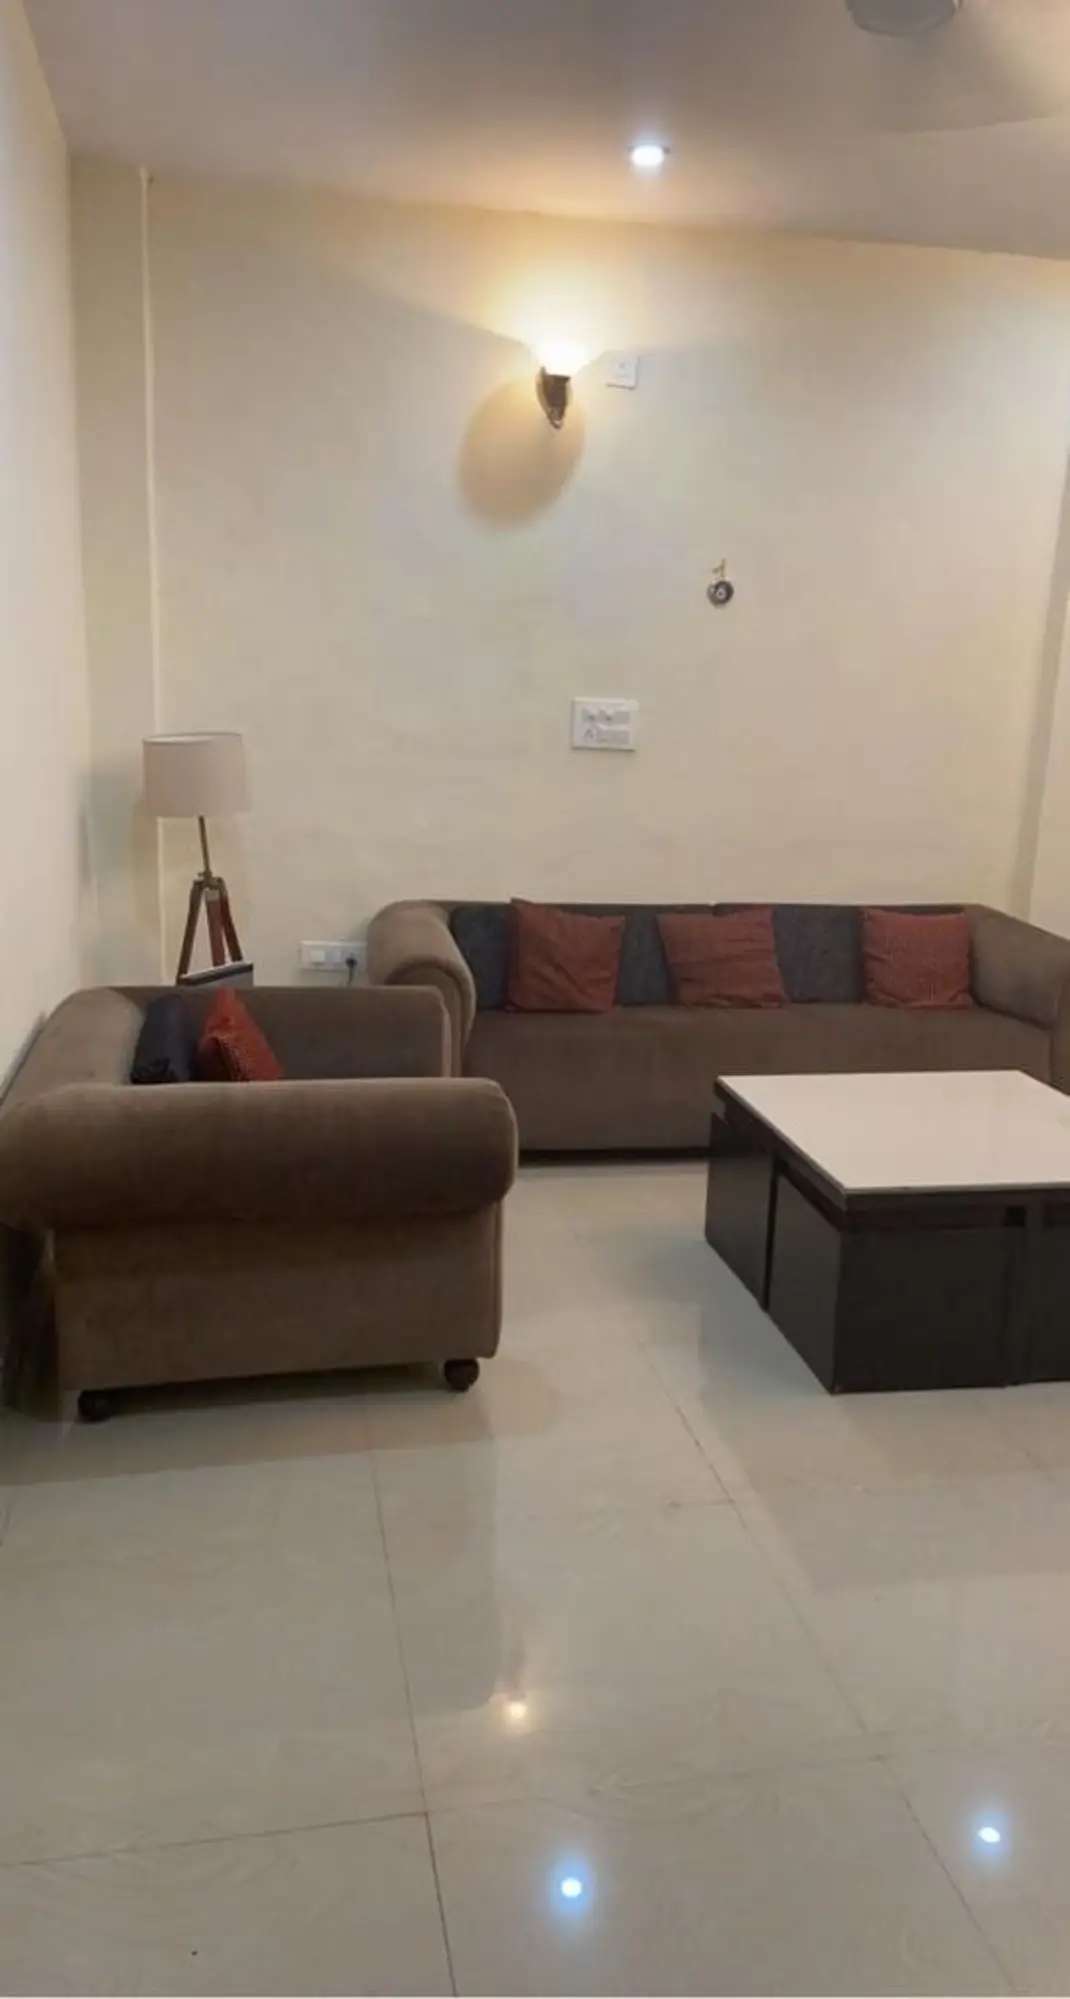 2 Bed/ 2 Bath Rent Apartment/ Flat, Furnished for rent @Greater Kailash -1  New delhi